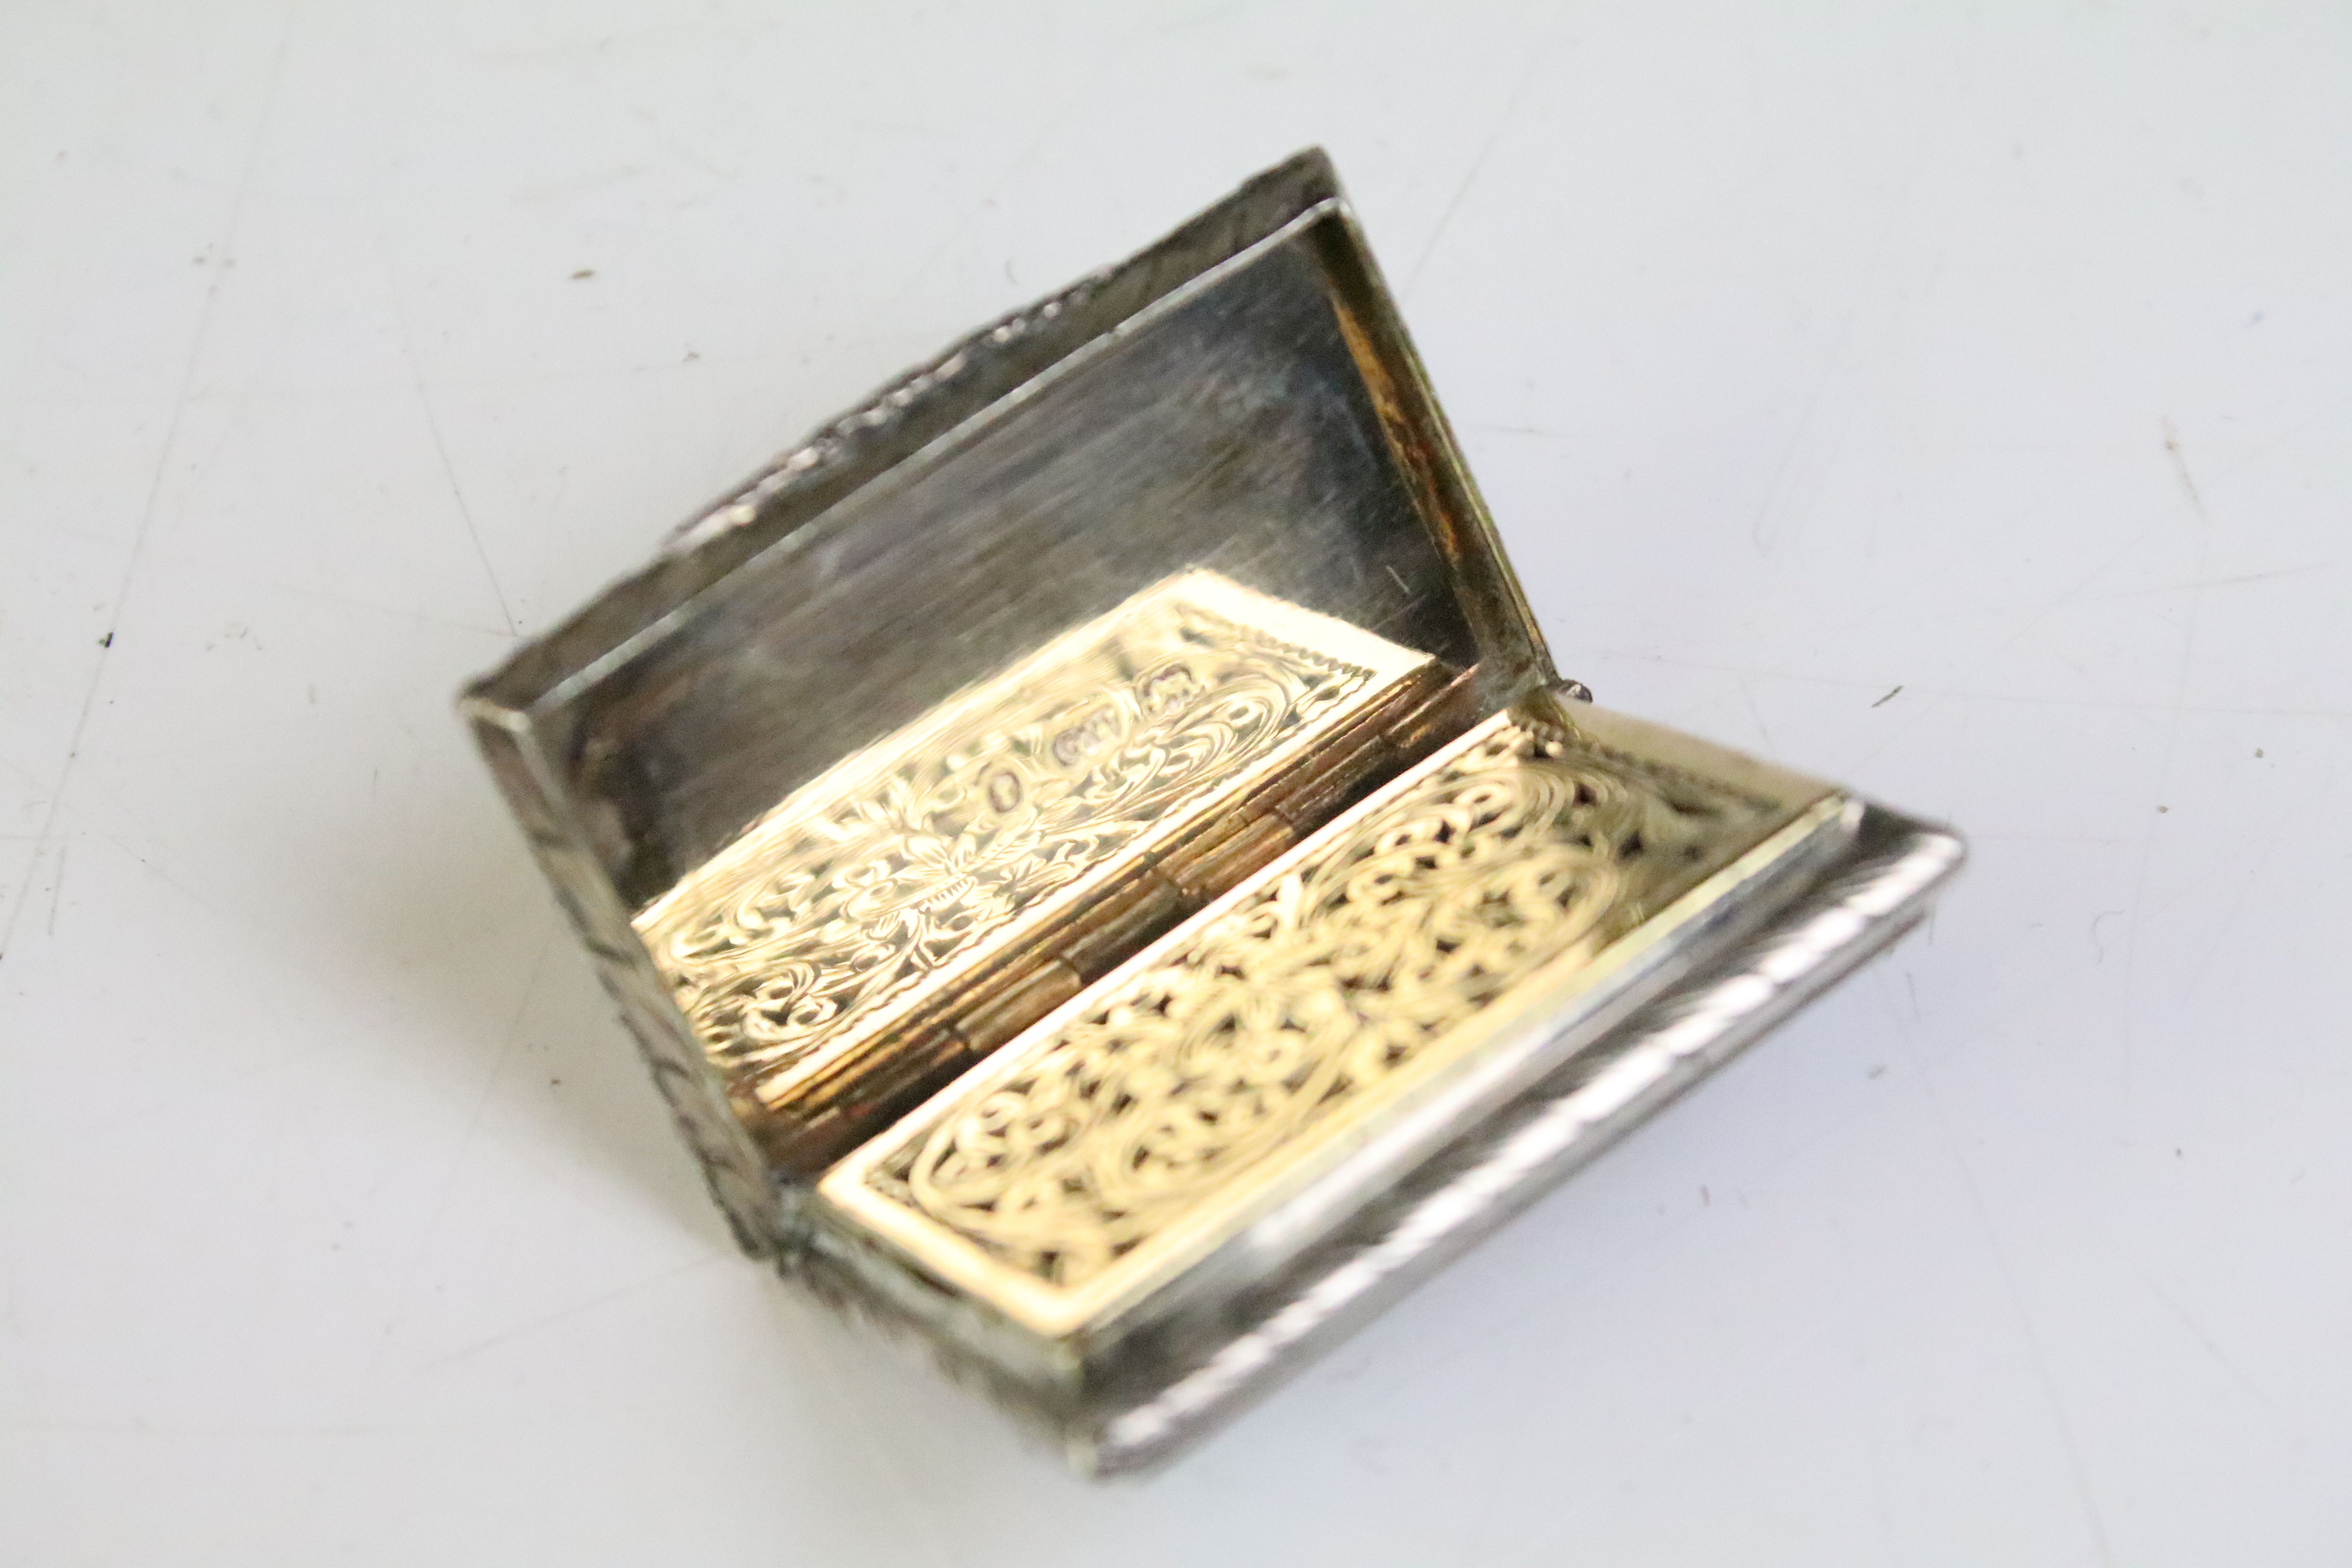 19th Century Victorian silver castle top vinaigrette. The vinaigrette having a hinged lid with - Image 3 of 3